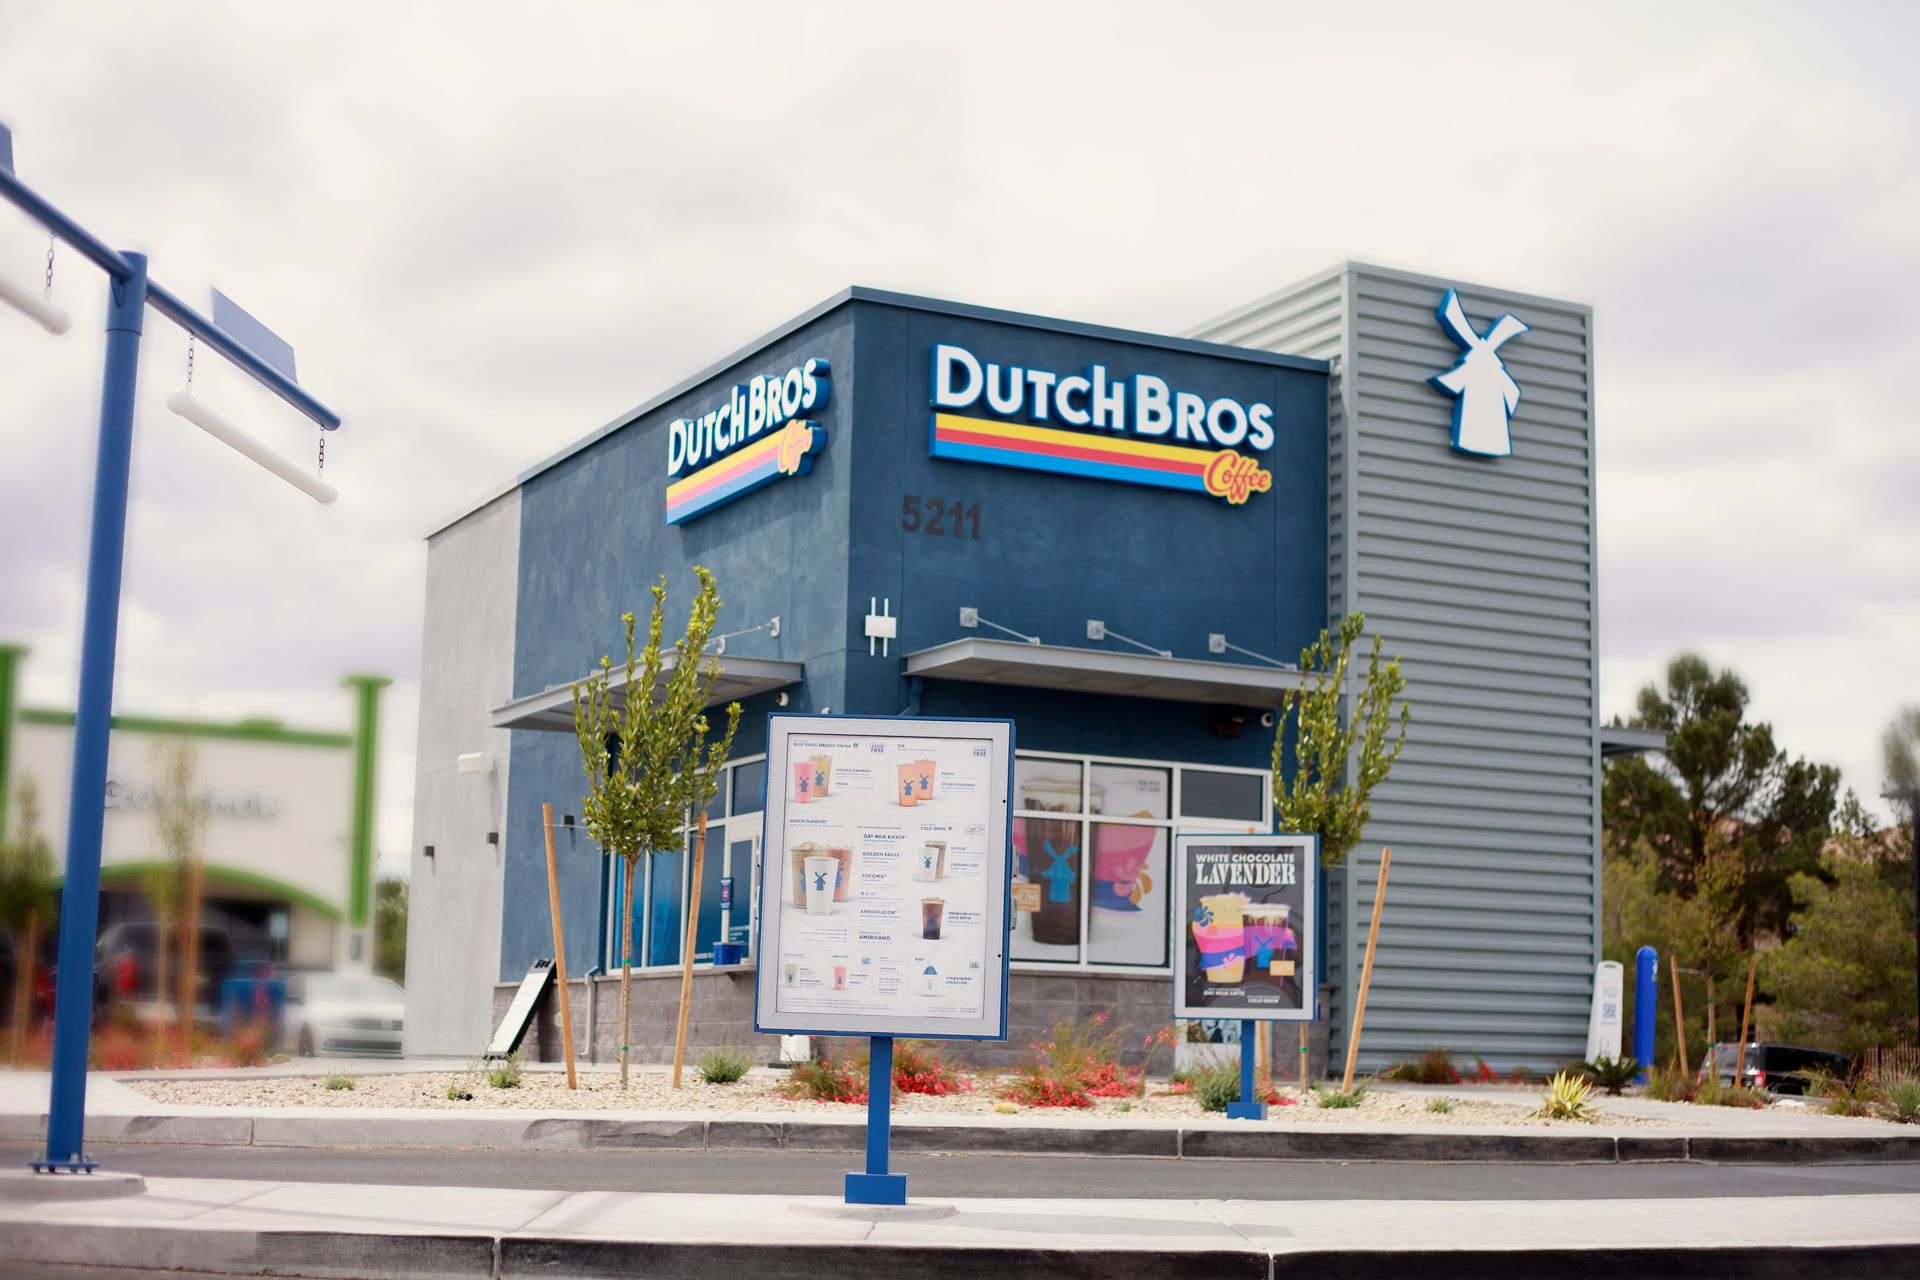 A dutch bros coffee shop with a sign on the side.